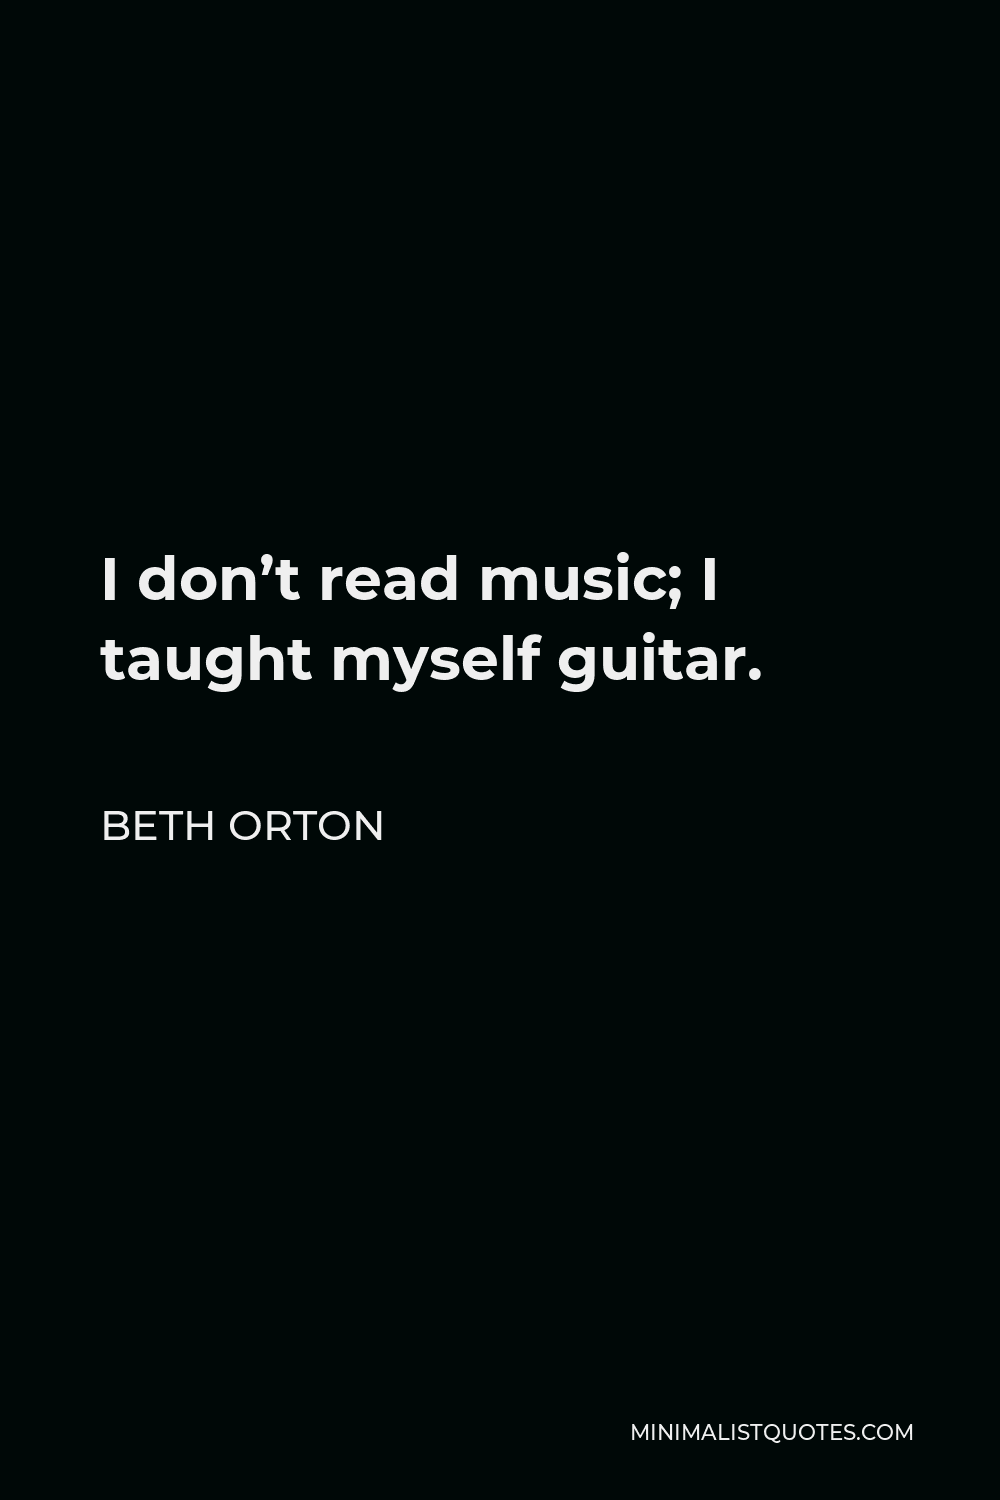 Beth Orton Quote - I don’t read music; I taught myself guitar.